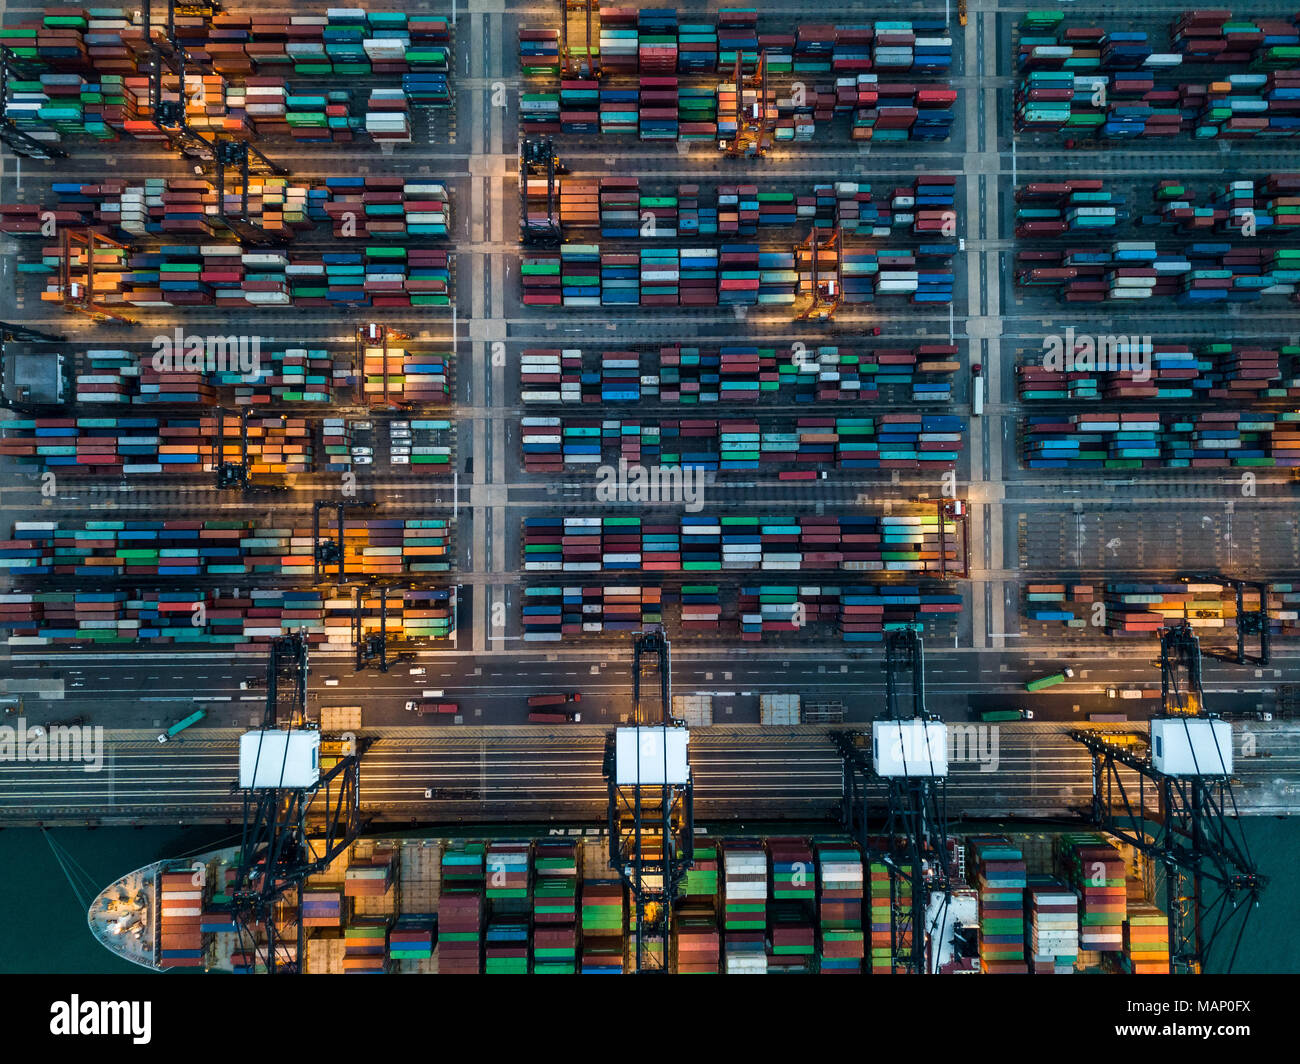 Kwai Tsing Container Terminals from drone view Stock Photo